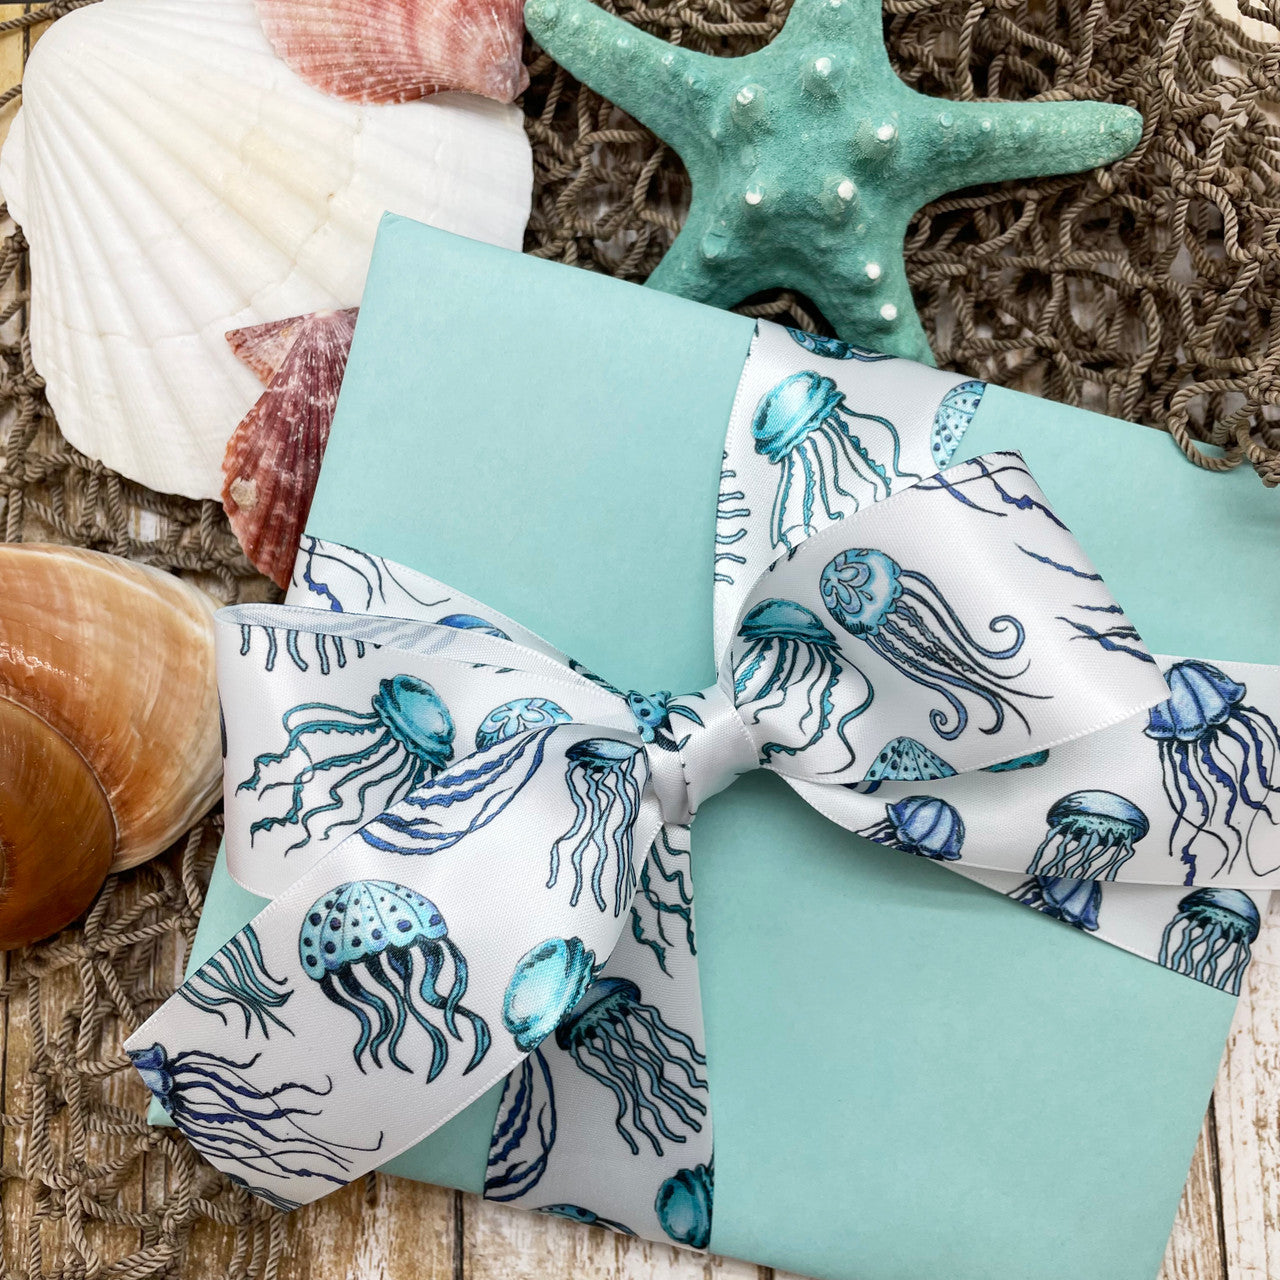 Jelly fish ribbon makes a beautiful bow for the perfect Summer gift!